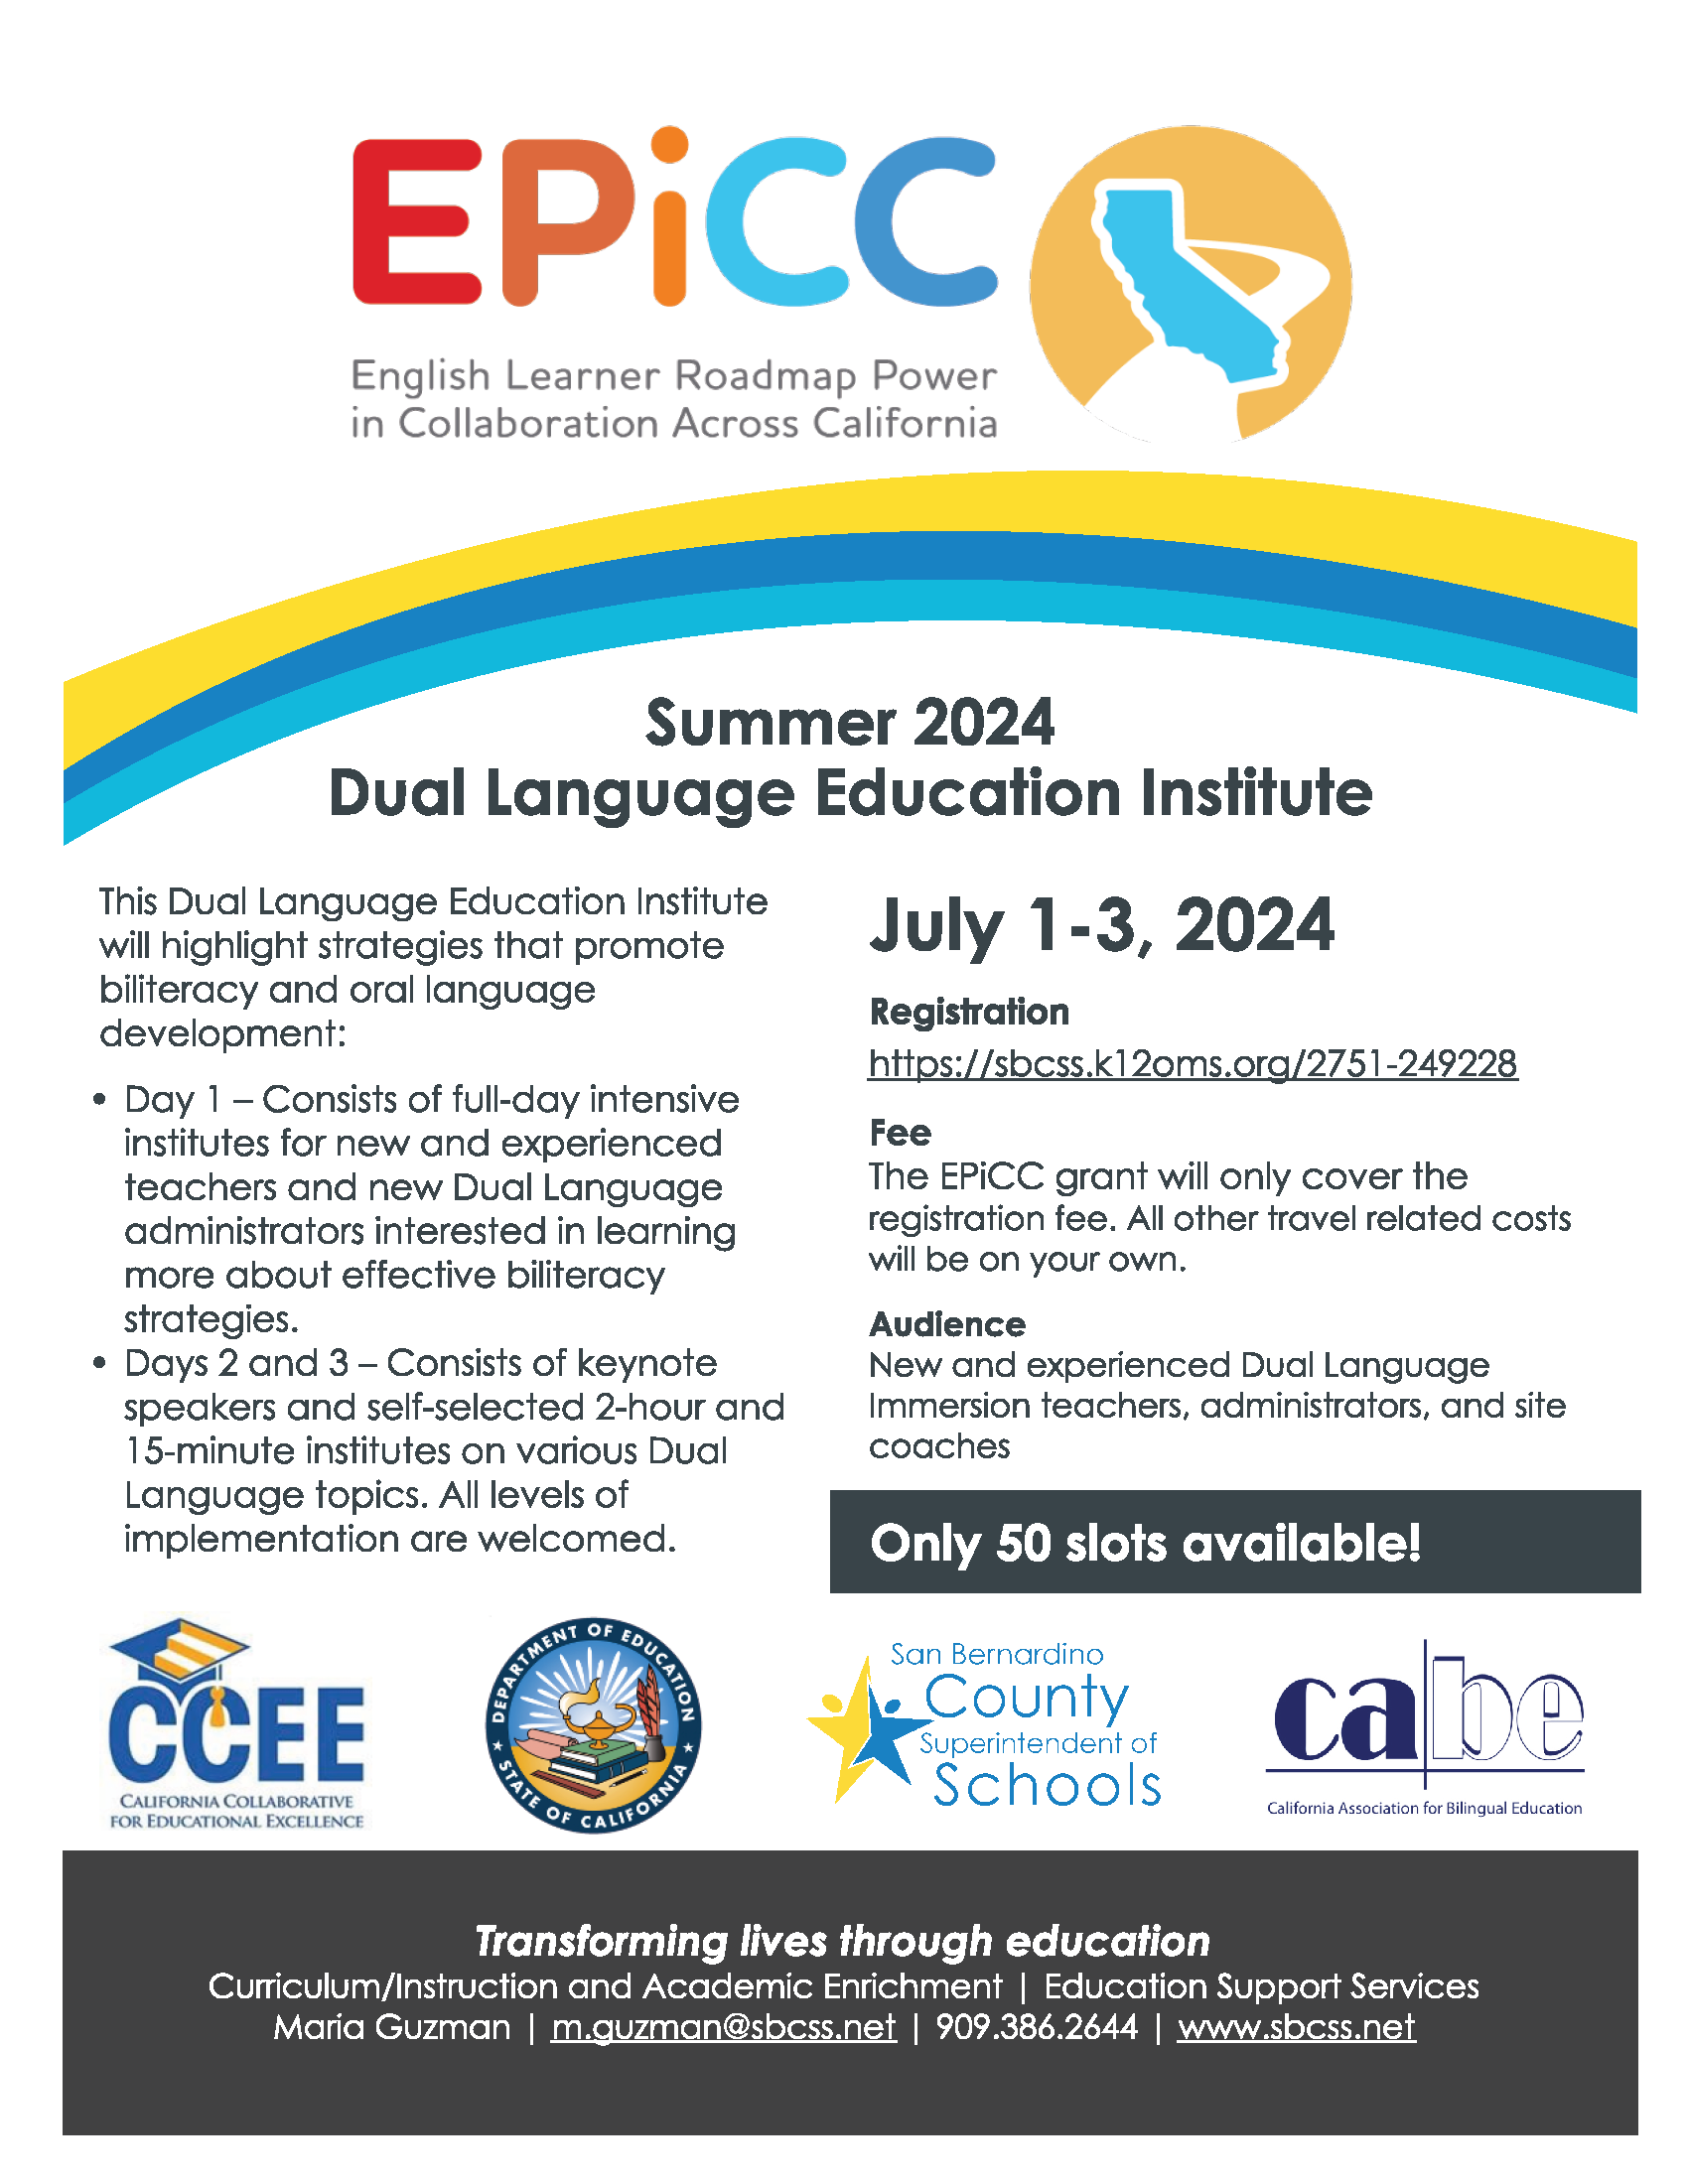 Summer 2024 Dual Language Education Institute, July 1-3, 2024 Flyer